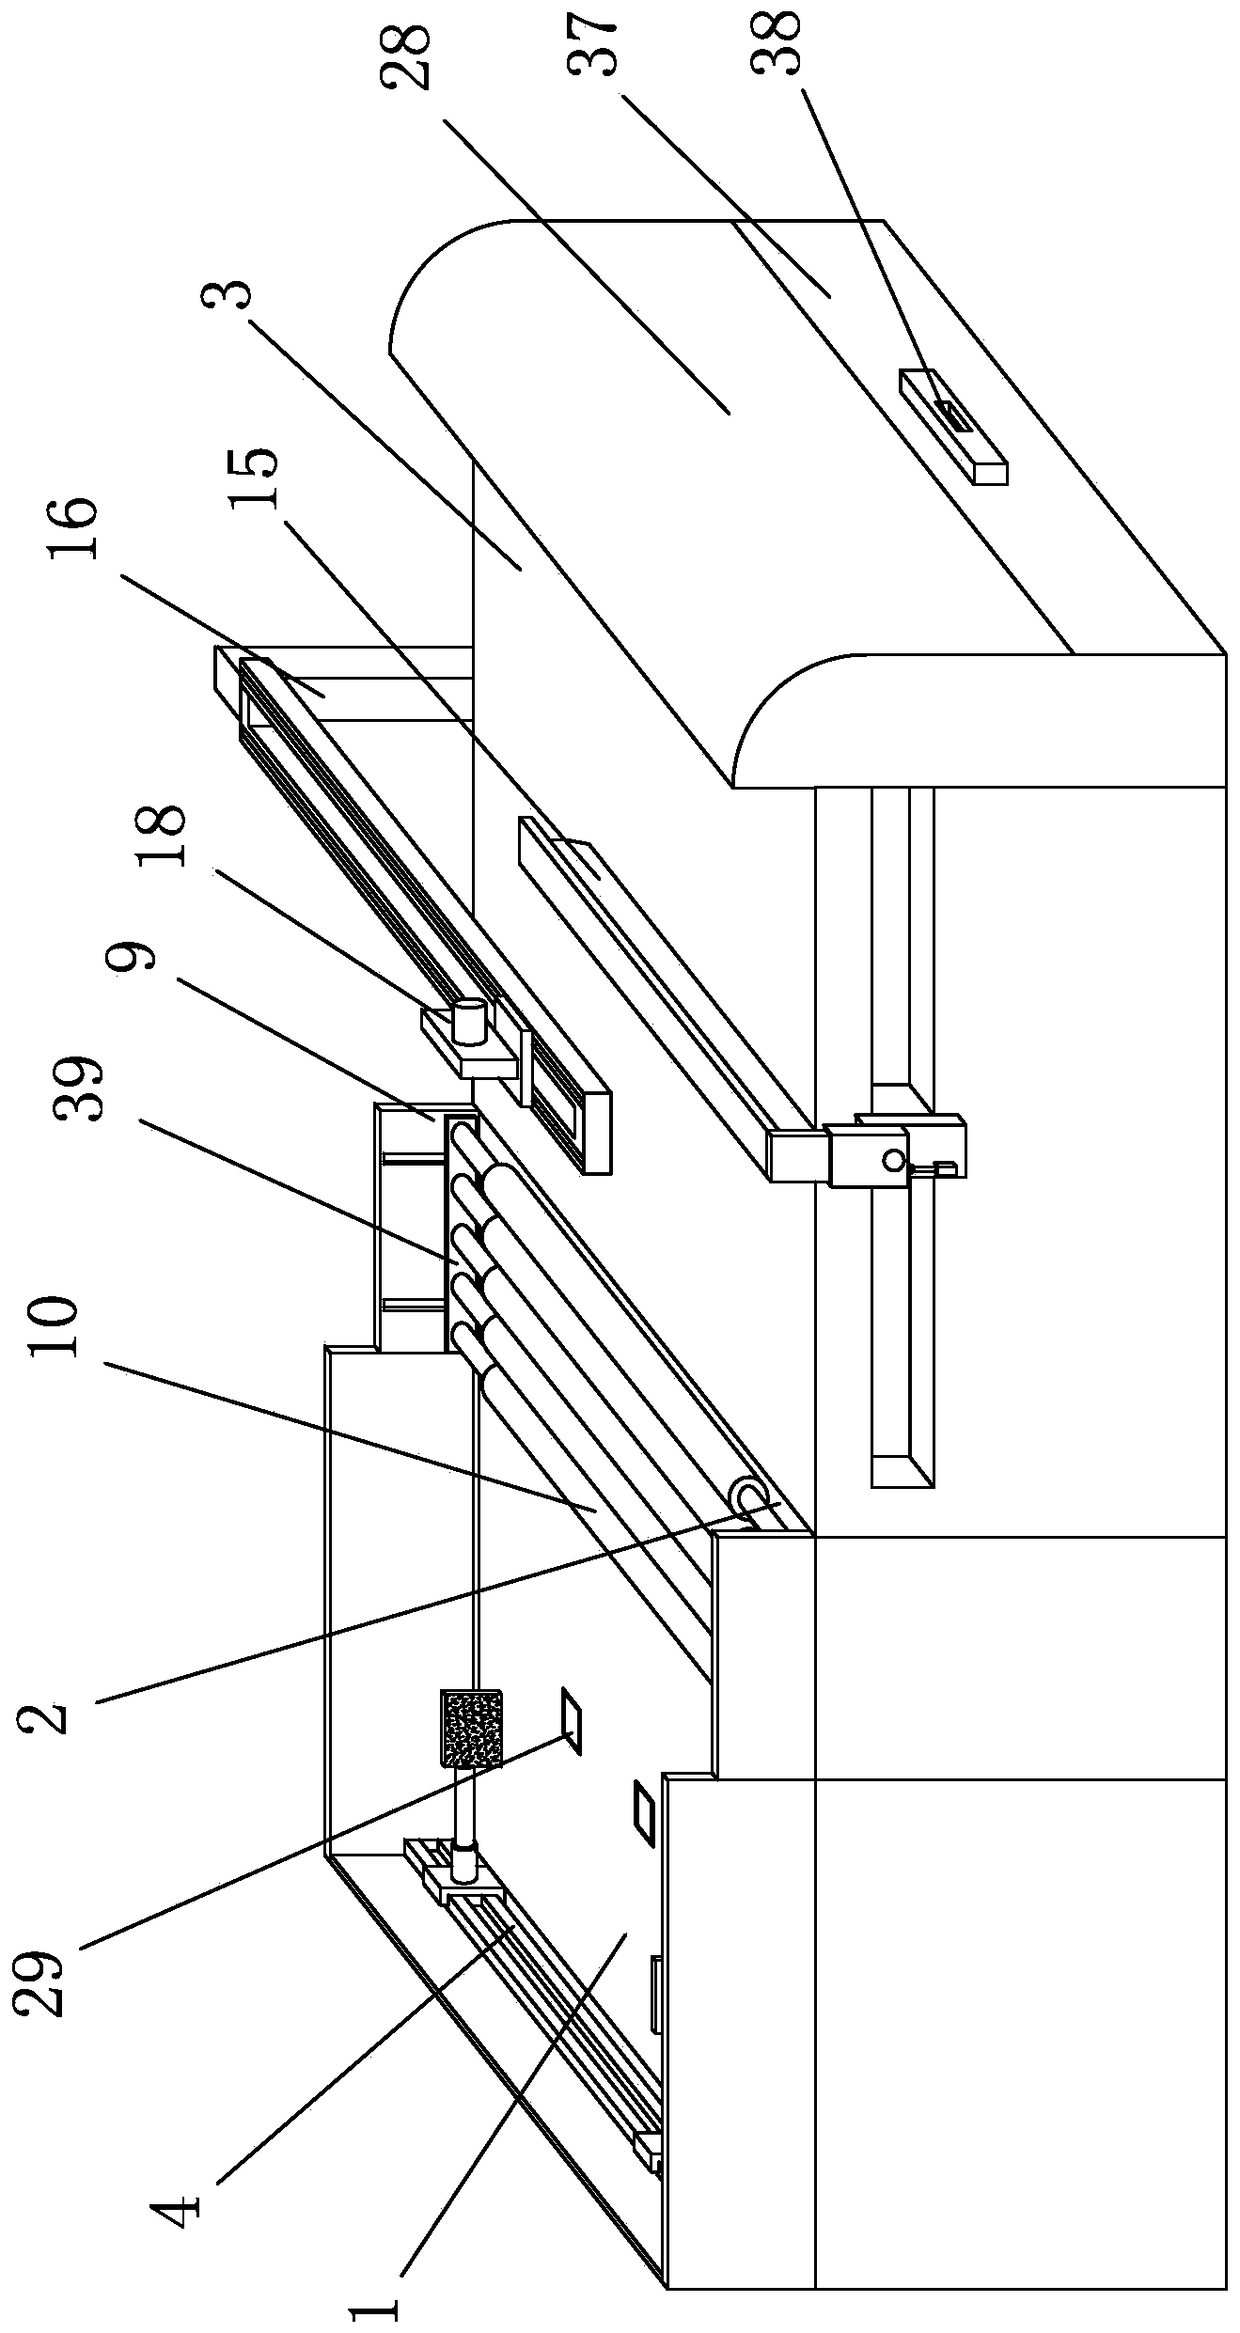 A cutting device used in aluminum processing and production